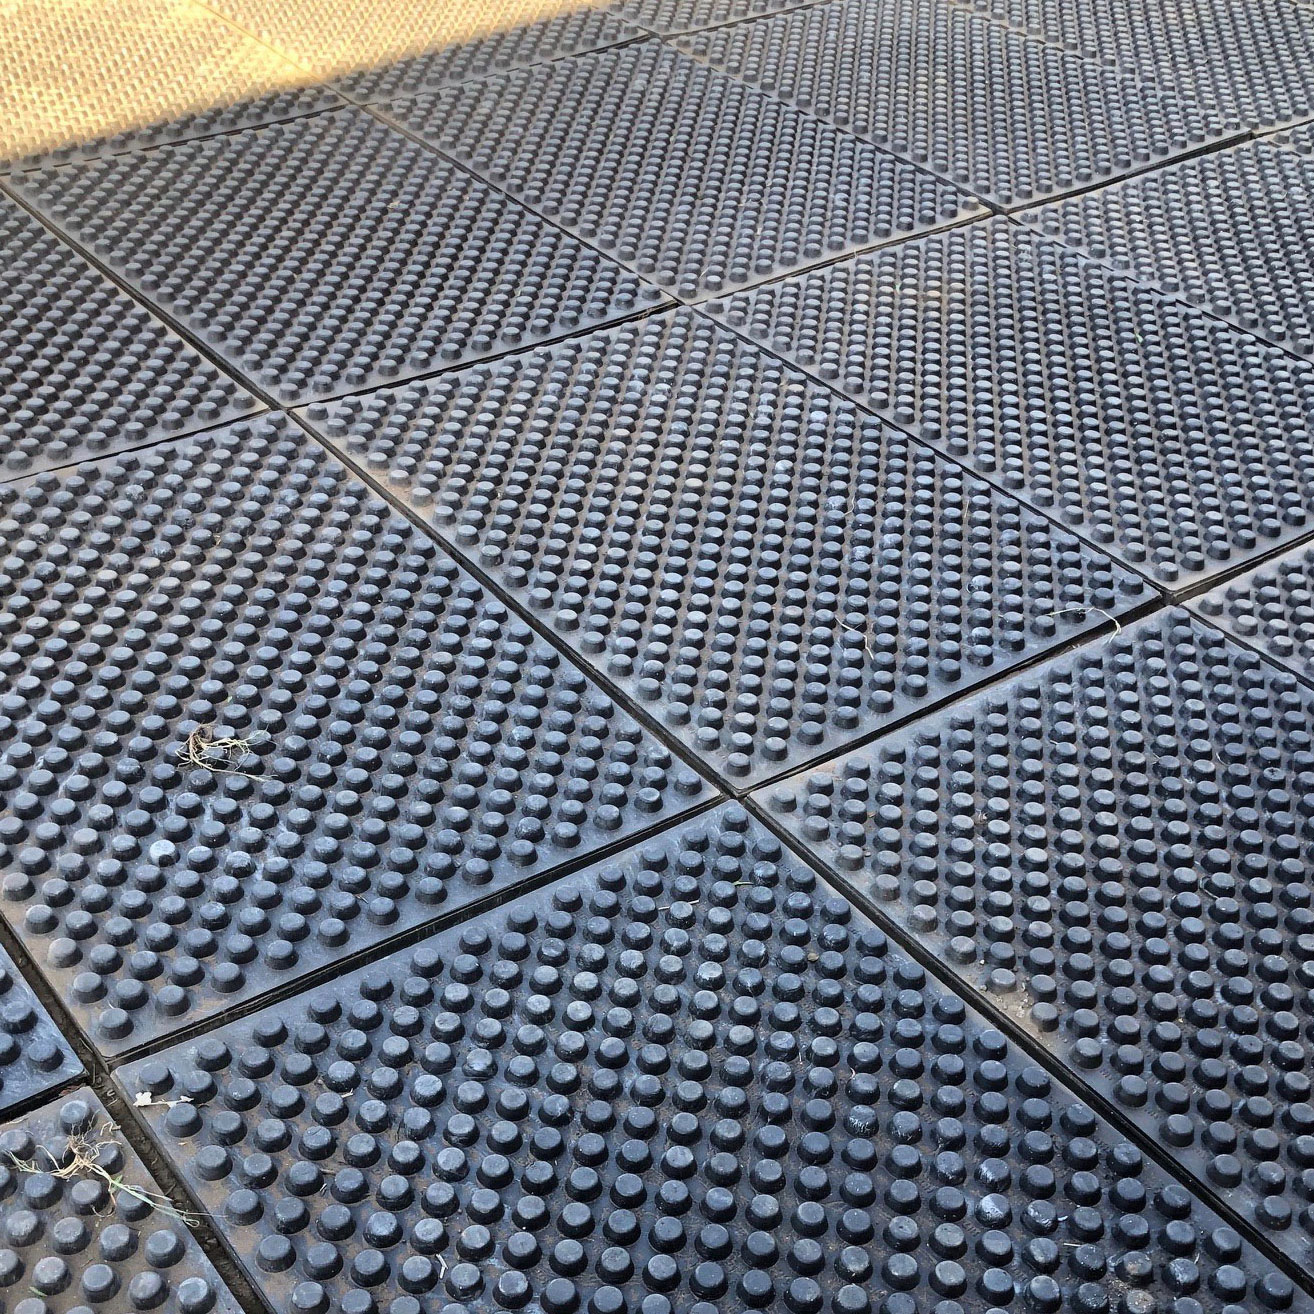 Base mats in turnout with sand